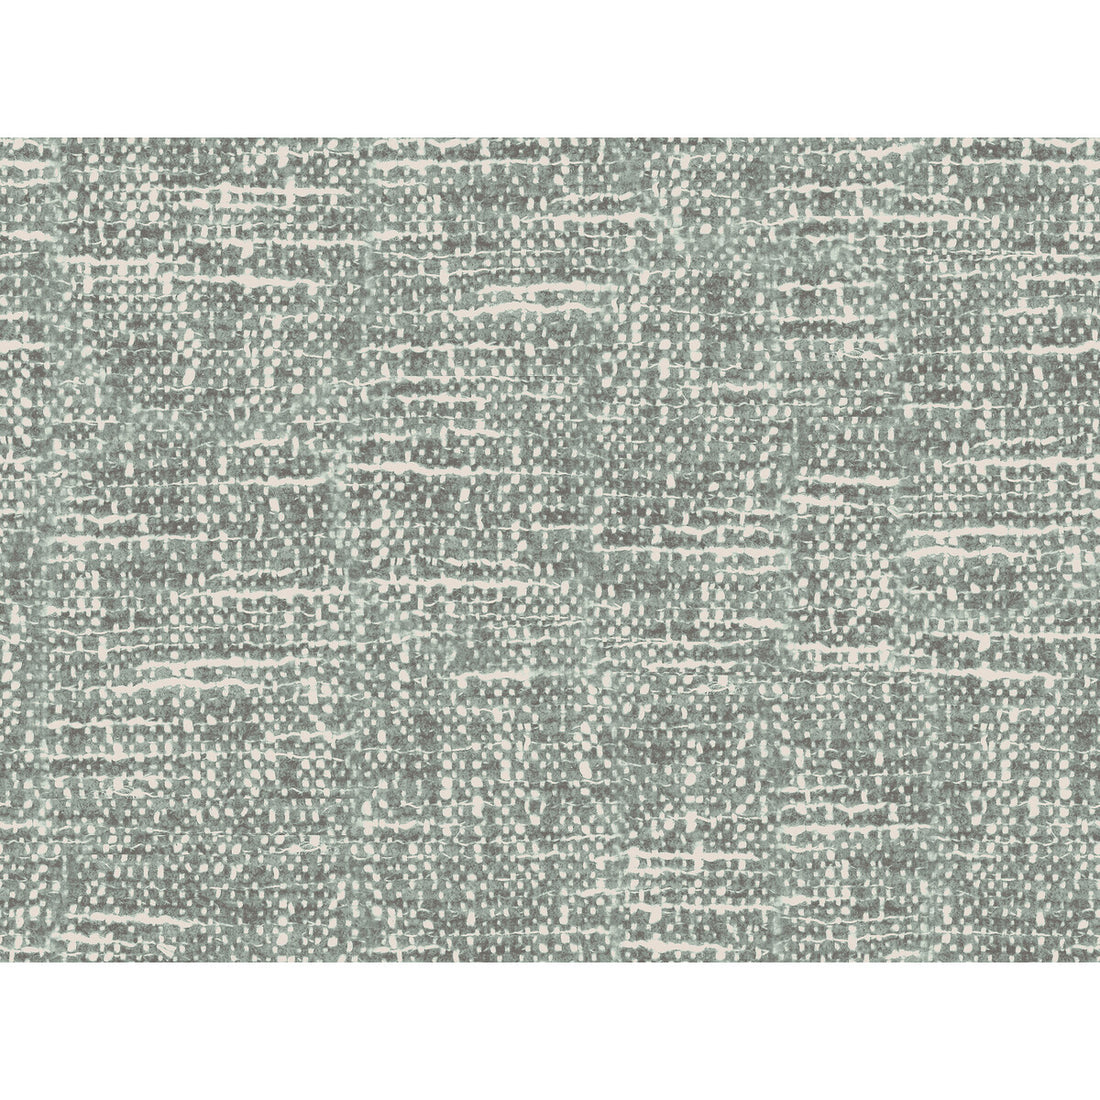 Tinge fabric in jade color - pattern GWF-3720.23.0 - by Lee Jofa Modern in the Kelly Wearstler Textures collection